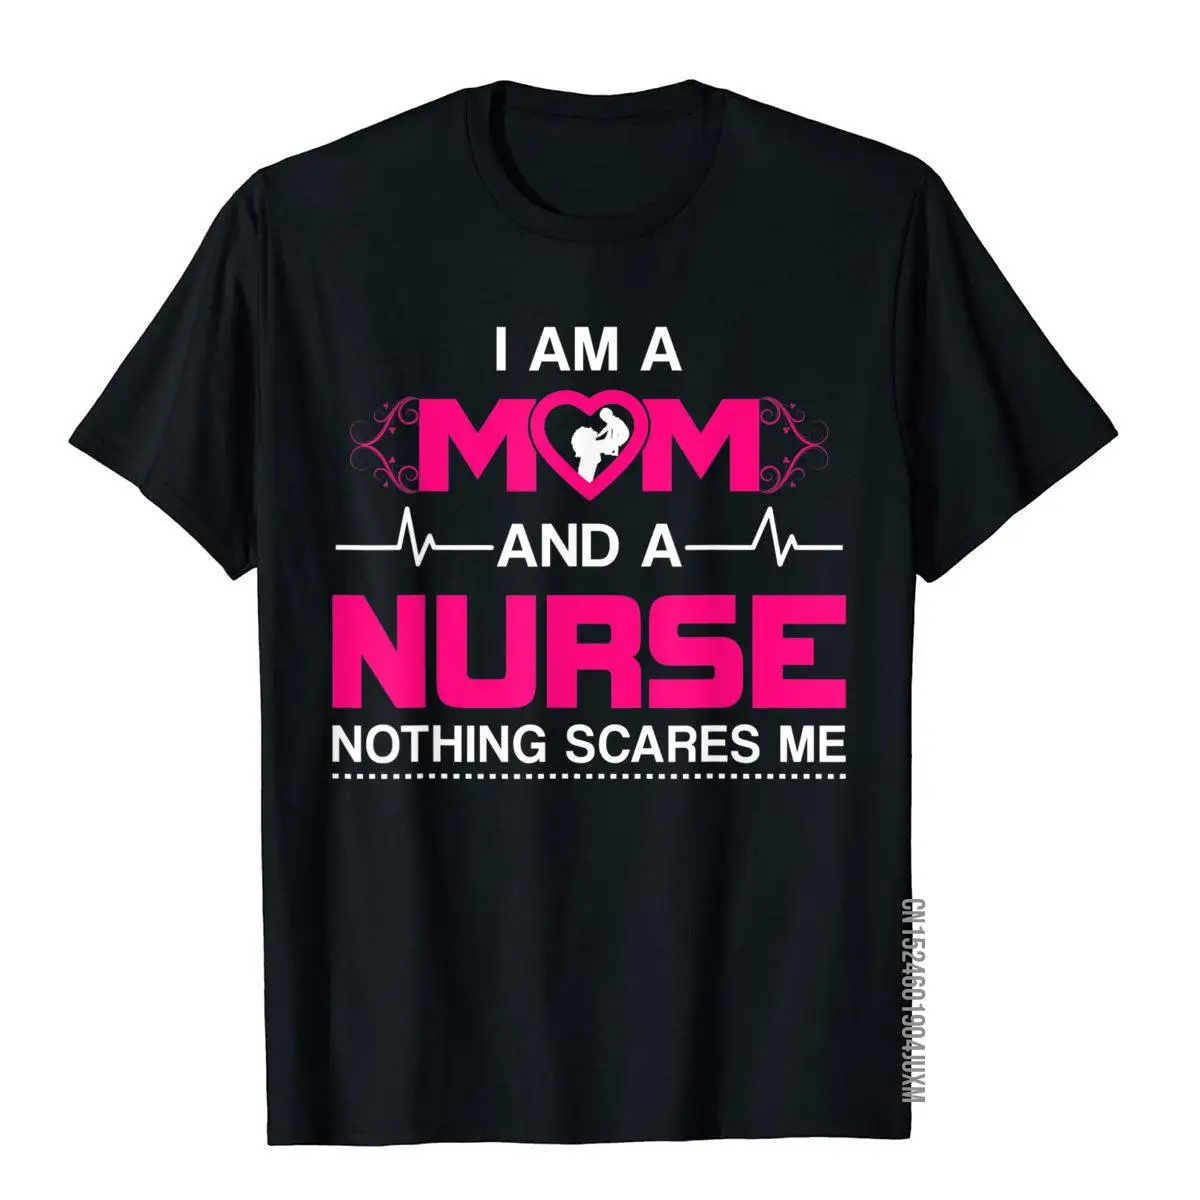 

I Am A Mom And A Nurse Nothing Scares Me Funny Nurse T-Shirt Cosie Crazy Tops Shirts Brand New Cotton Young T Shirts